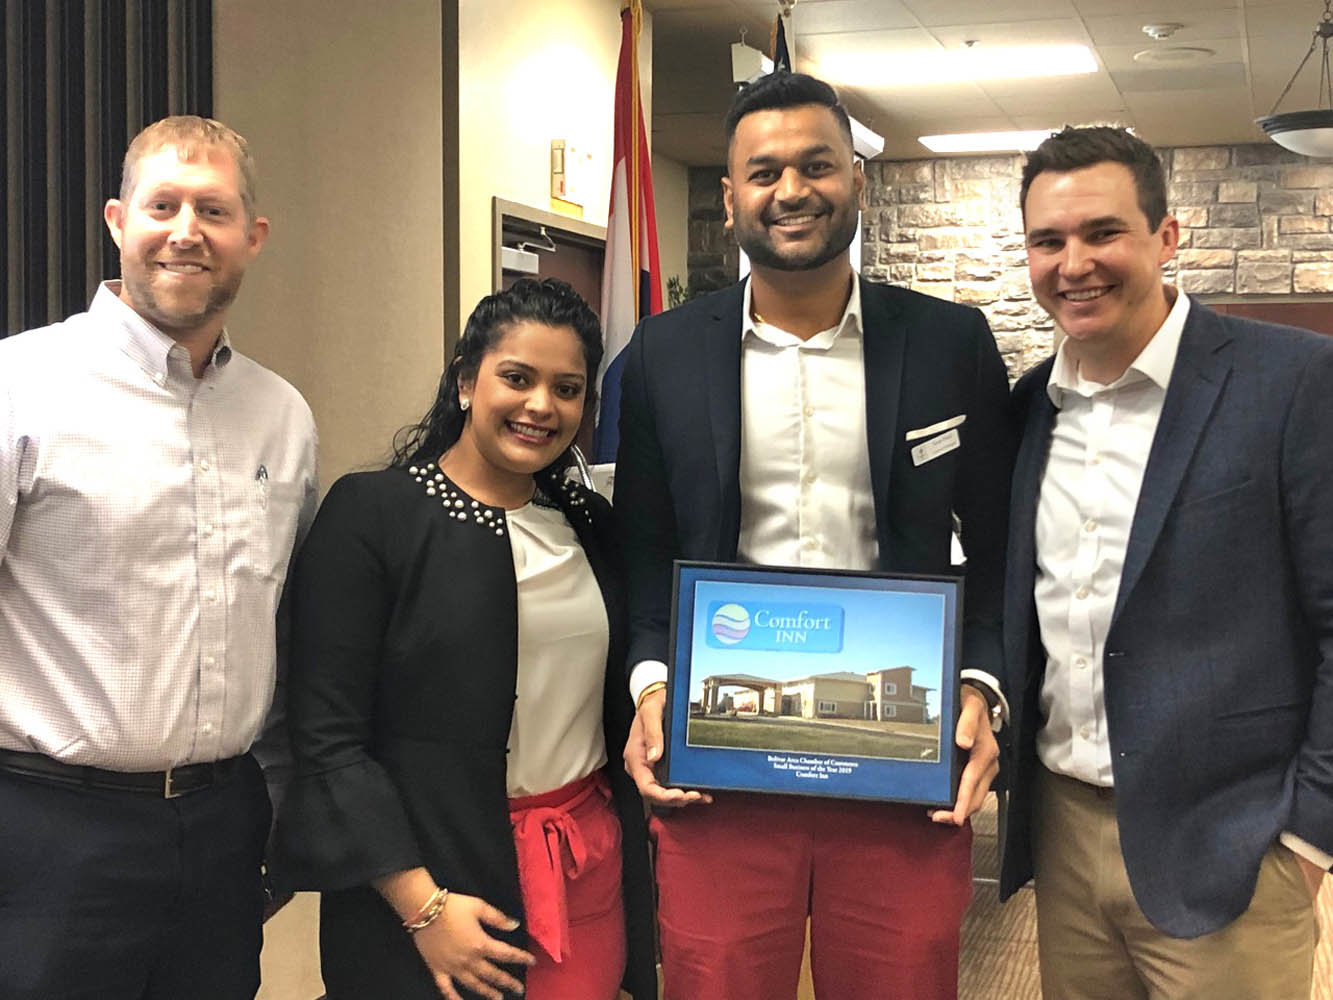 BOLIVAR’S TOP BUSINESSES
The Bolivar Area Chamber of Commerce honors Walmart as the 2019 Large Business of the Year and Comfort Inn as the Small Business of the Year during a Nov. 14 luncheon. Above, Comfort Inn owners Naiya and Shanil Patel, middle, receive the award from Bolivar chamber President Jared Taylor.